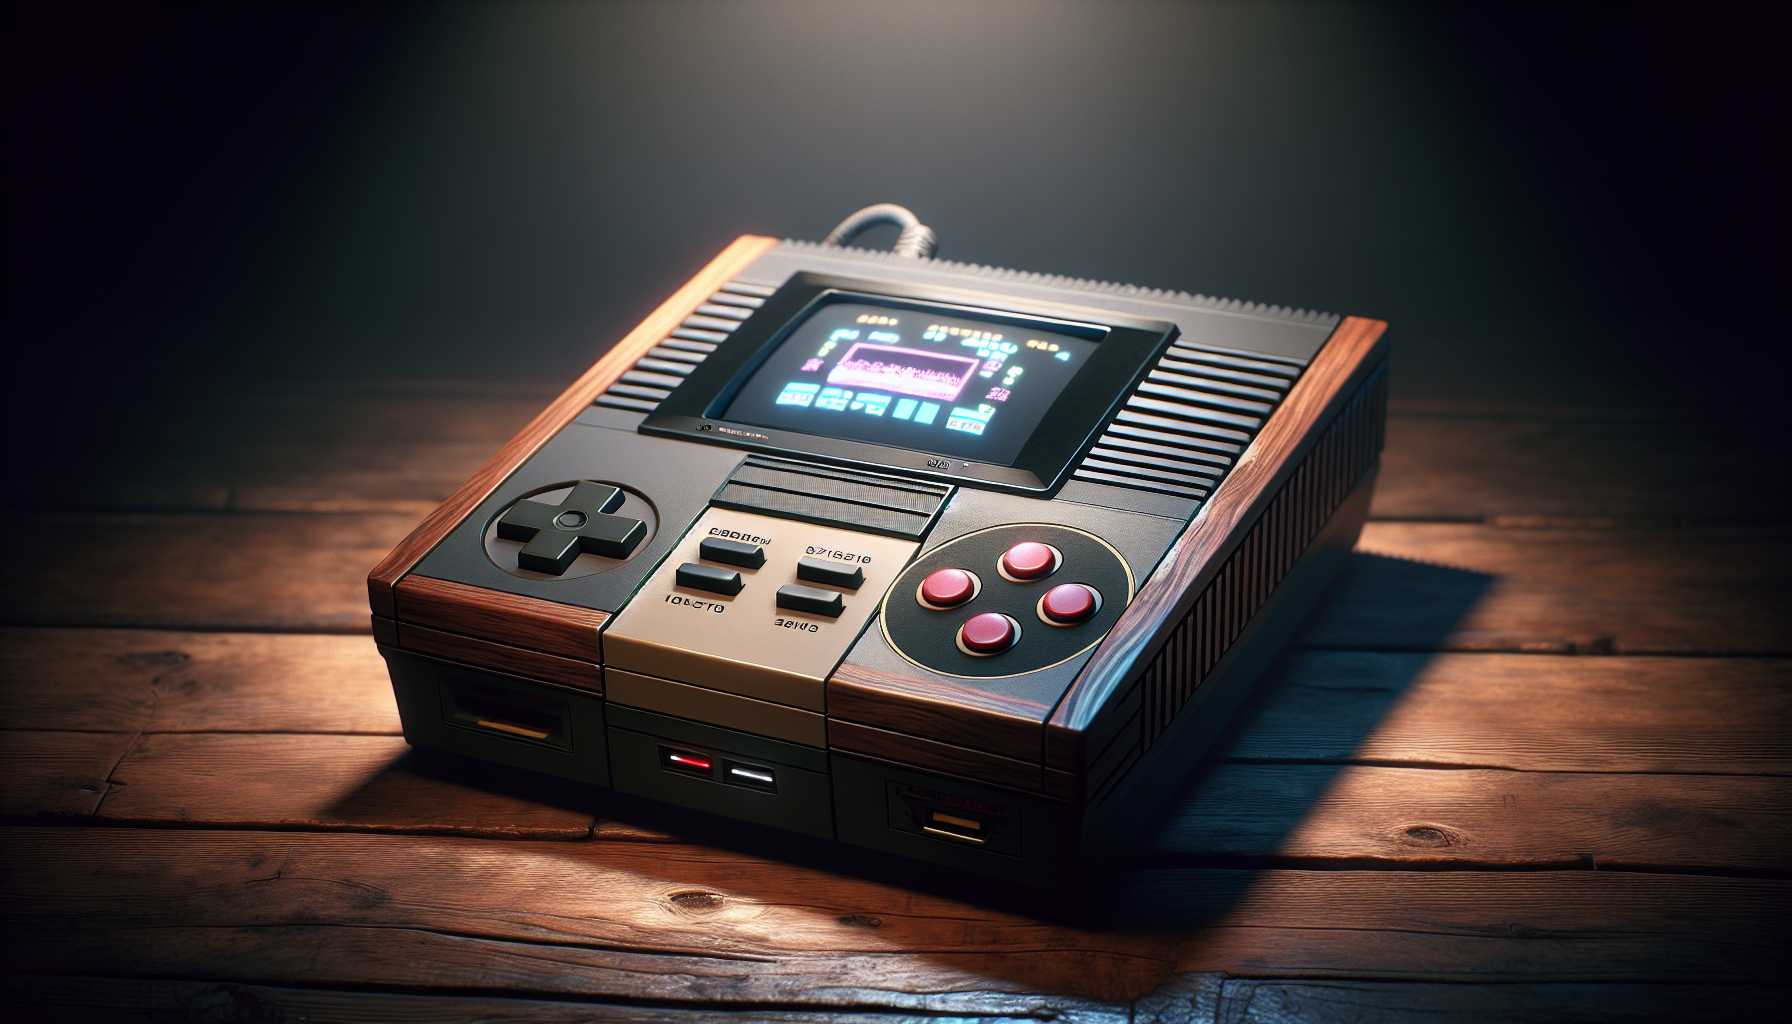 vintage video game console with modern touchscreen